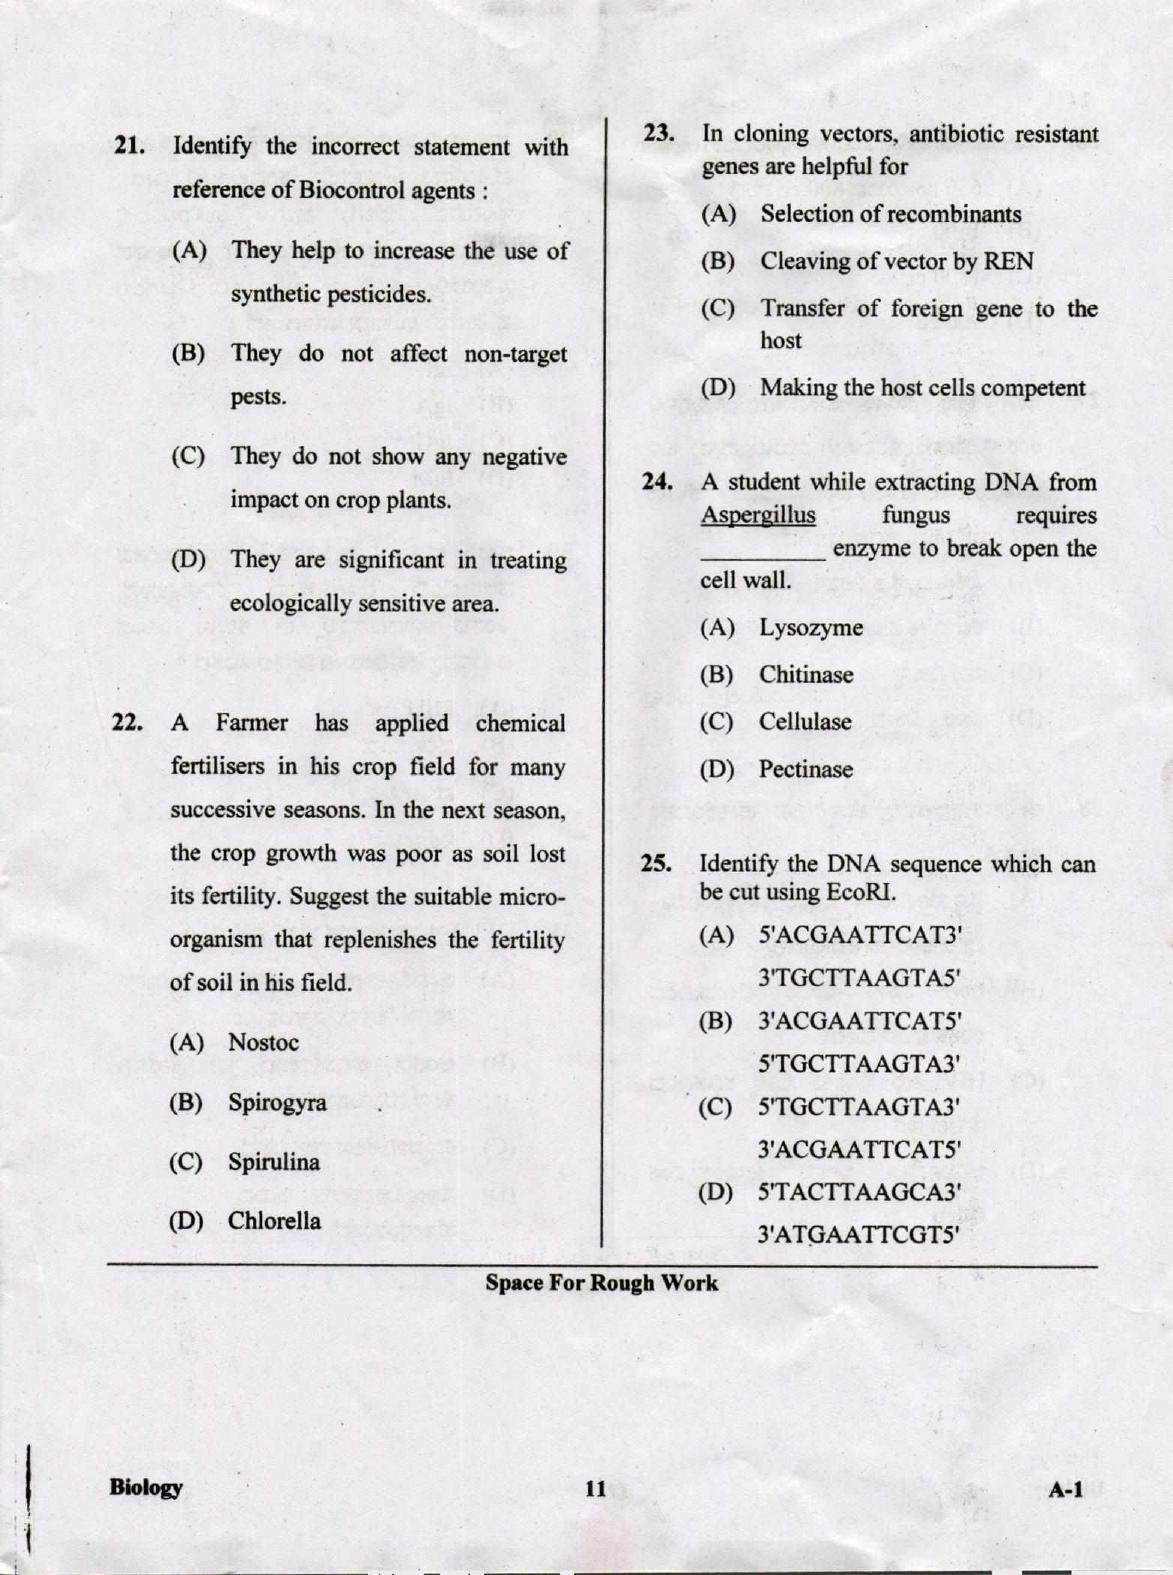 KCET Biology 2019 Question Papers - Page 11